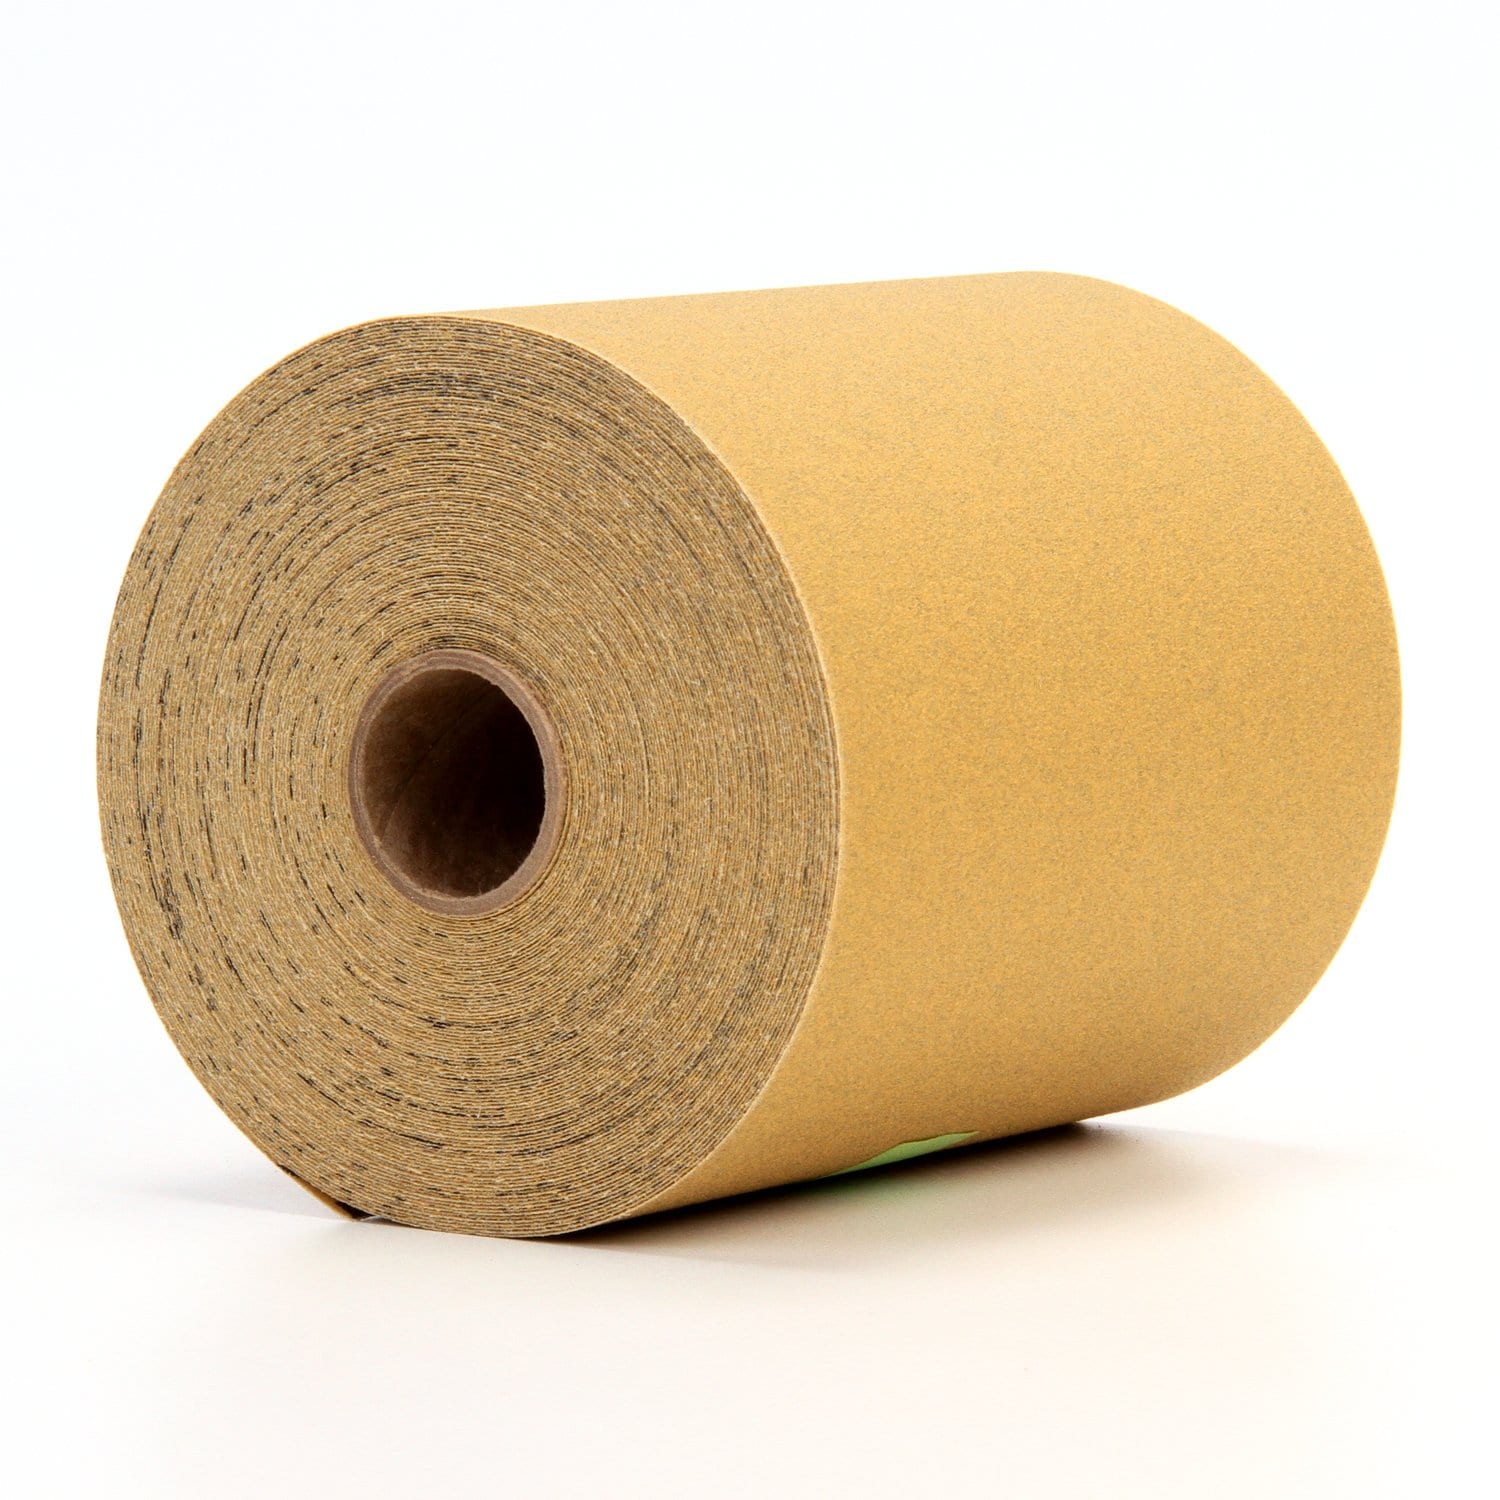 7100069993 - 3M Stikit Paper Roll 236U, P100 C-weight, Config